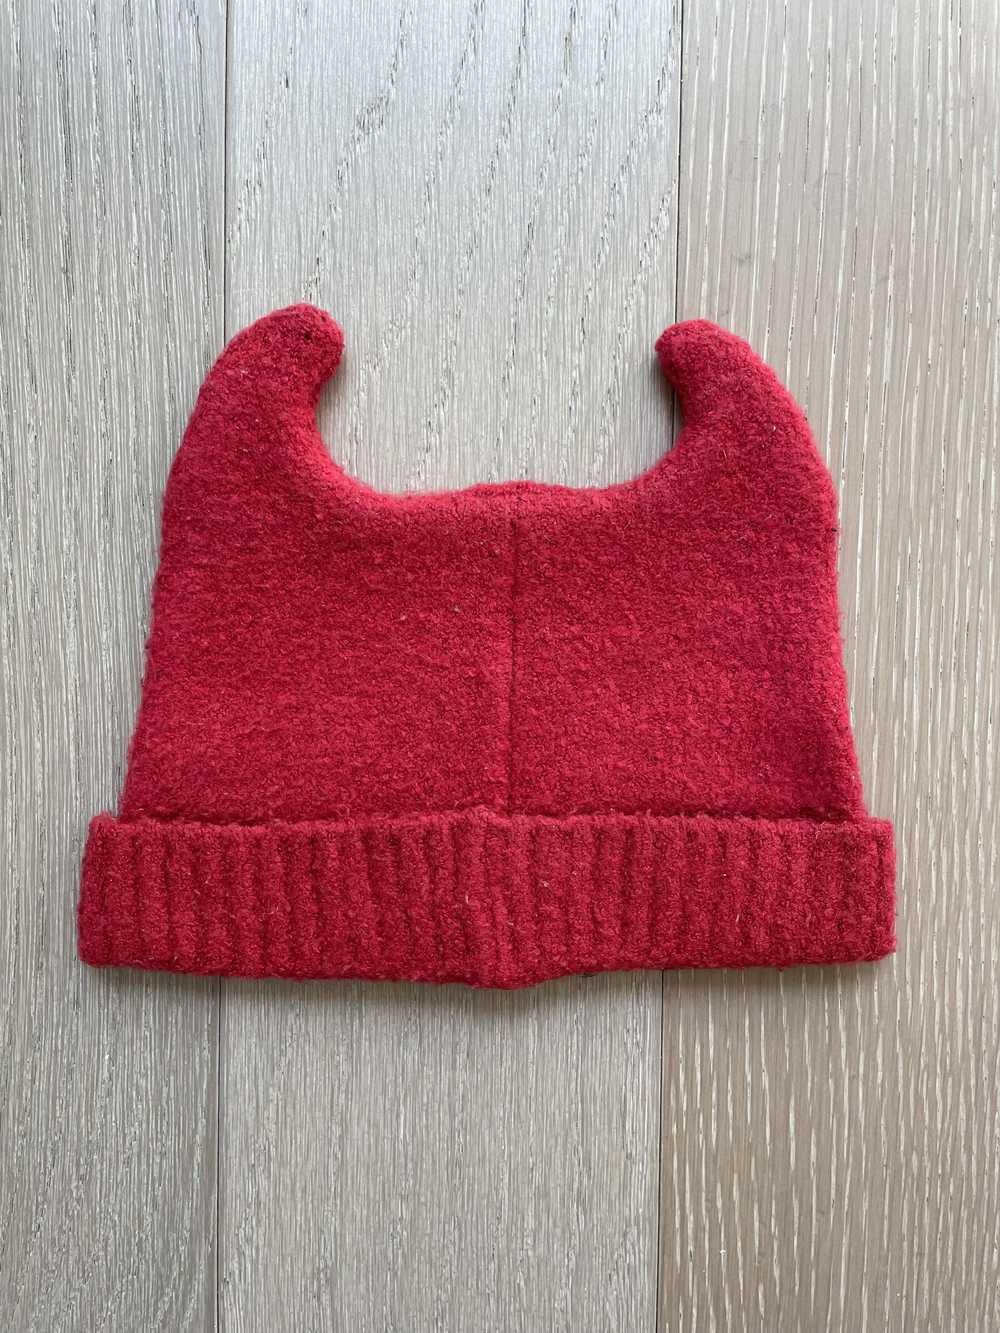 Hysteric Glamour Hysteric Mini Devil Beanie - image 2